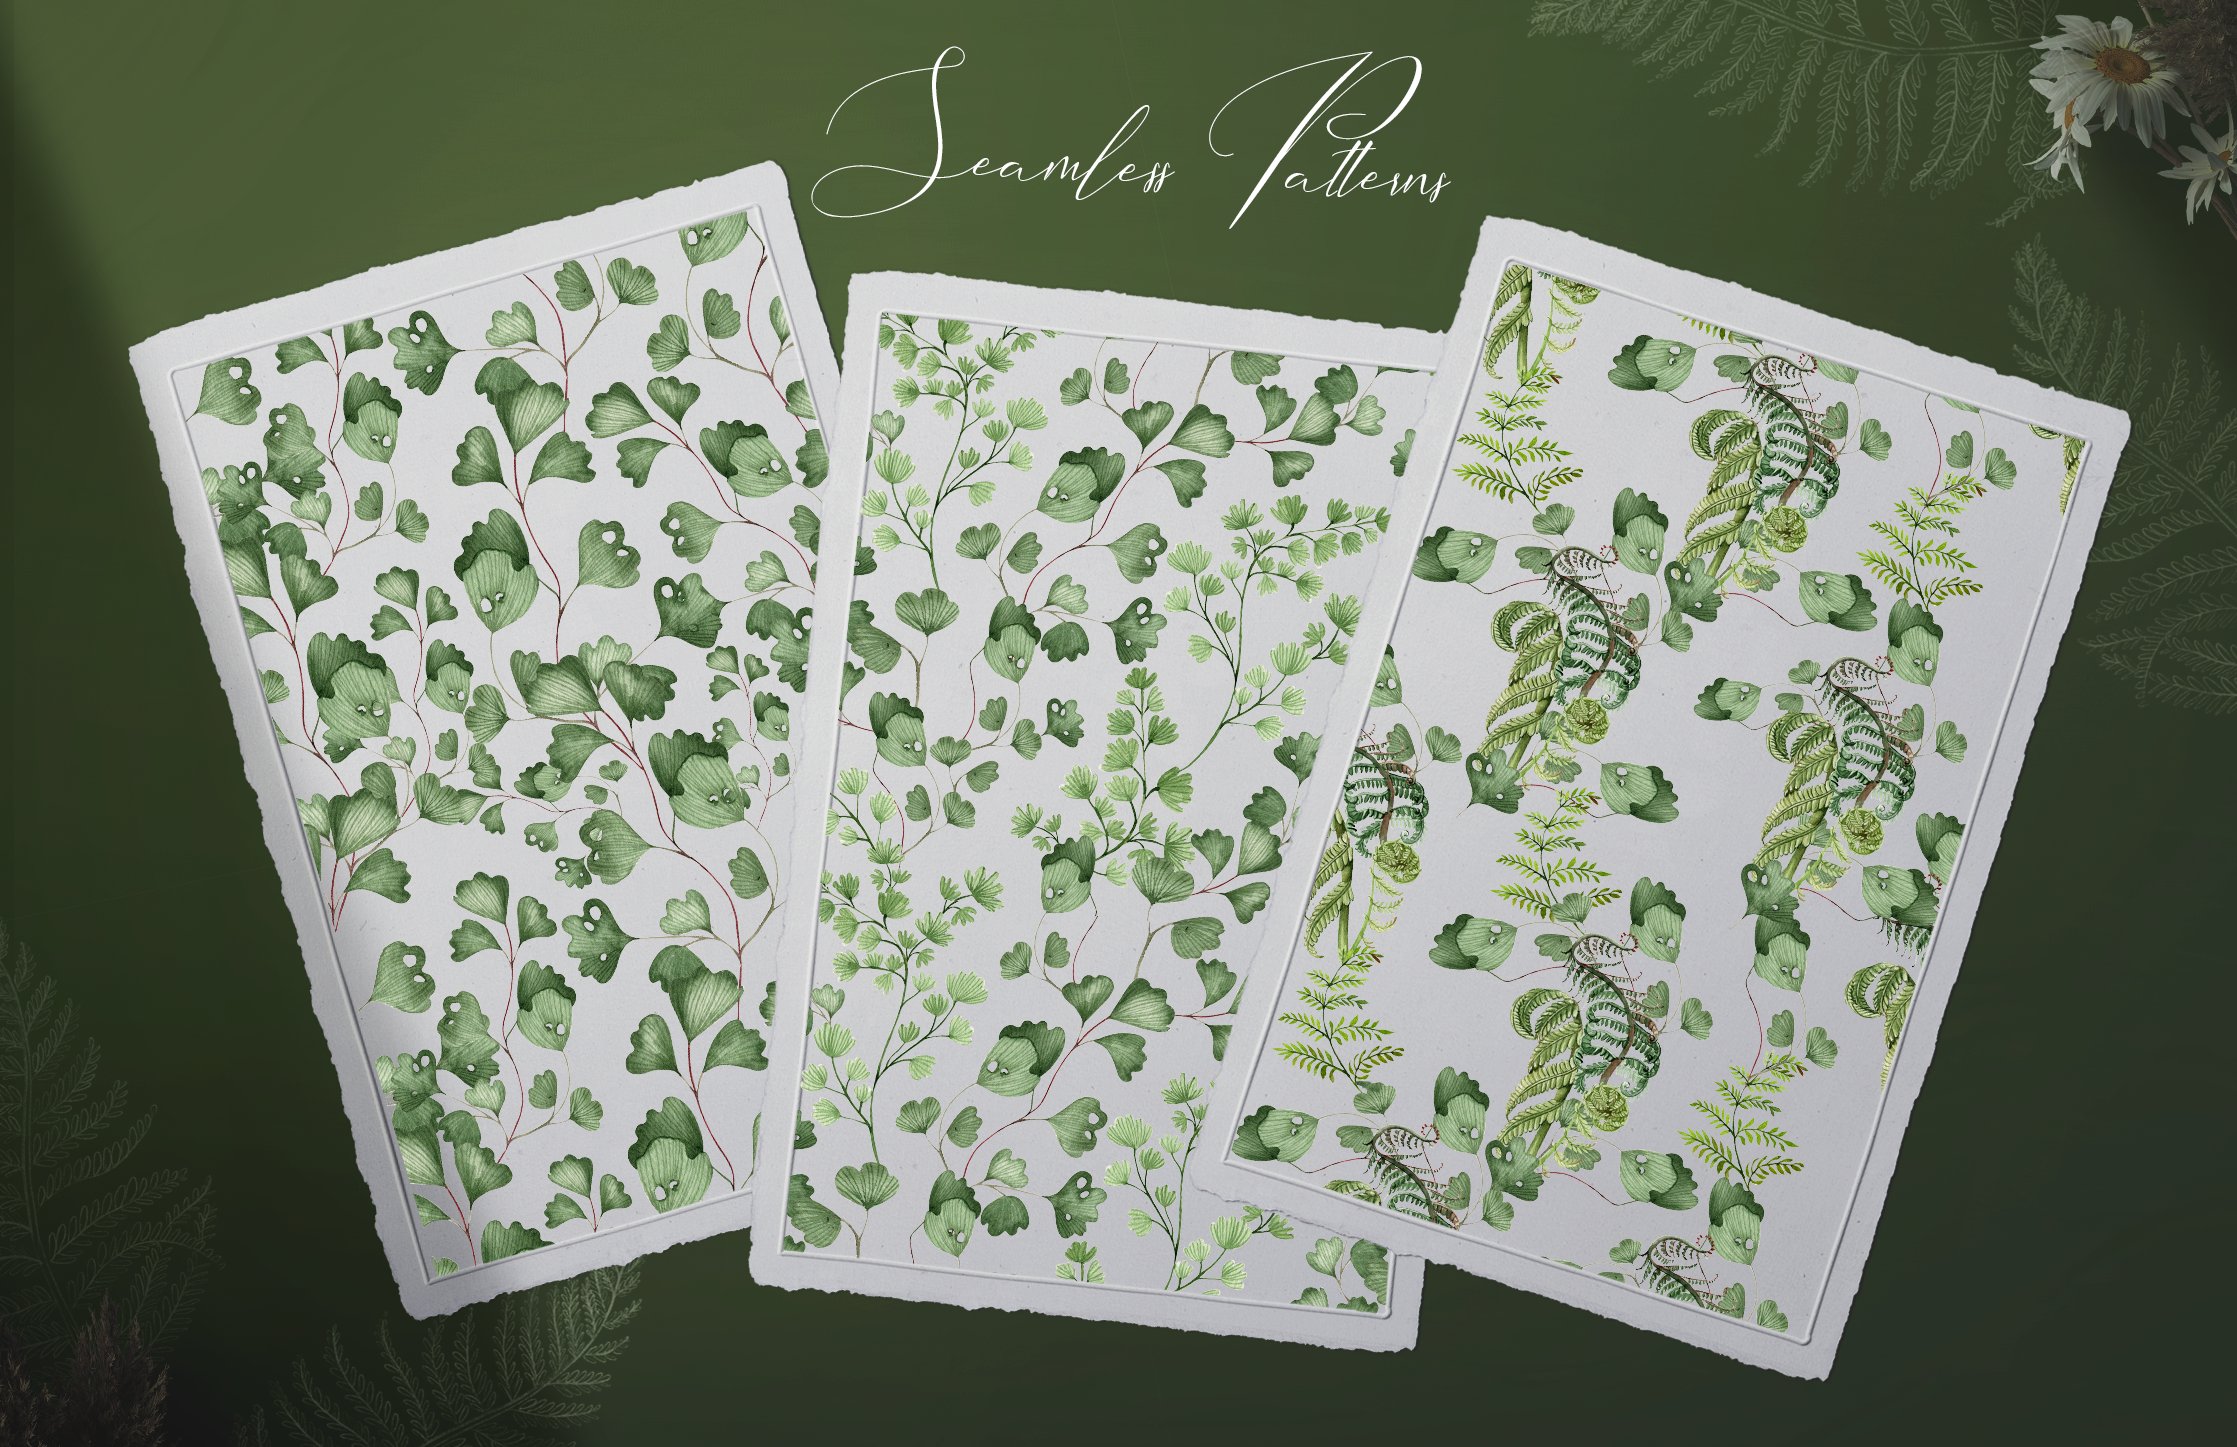 Three sheets of paper with green leaves on them.